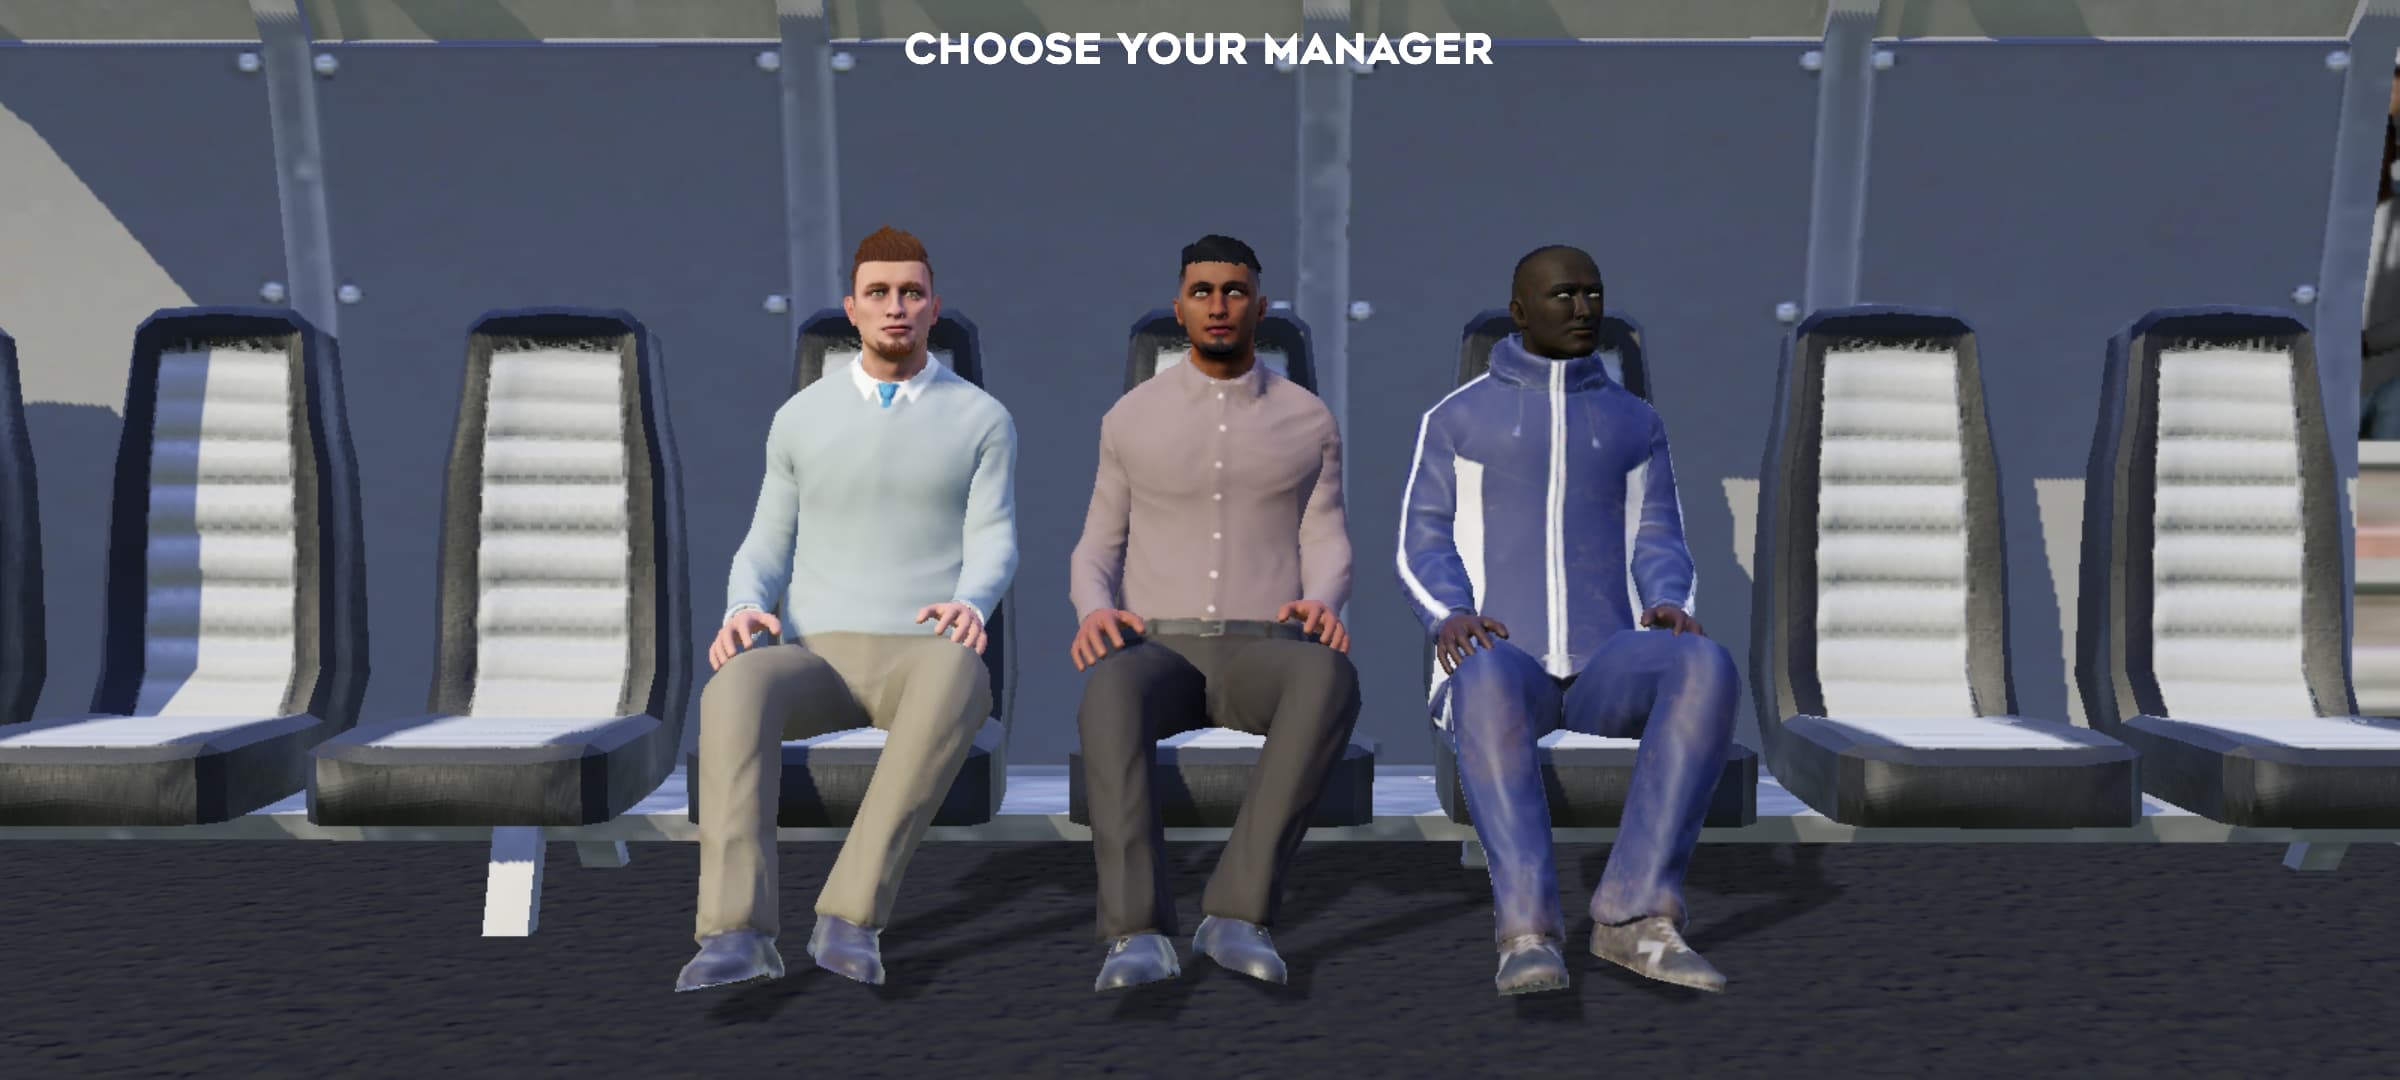 Choose Your Manager